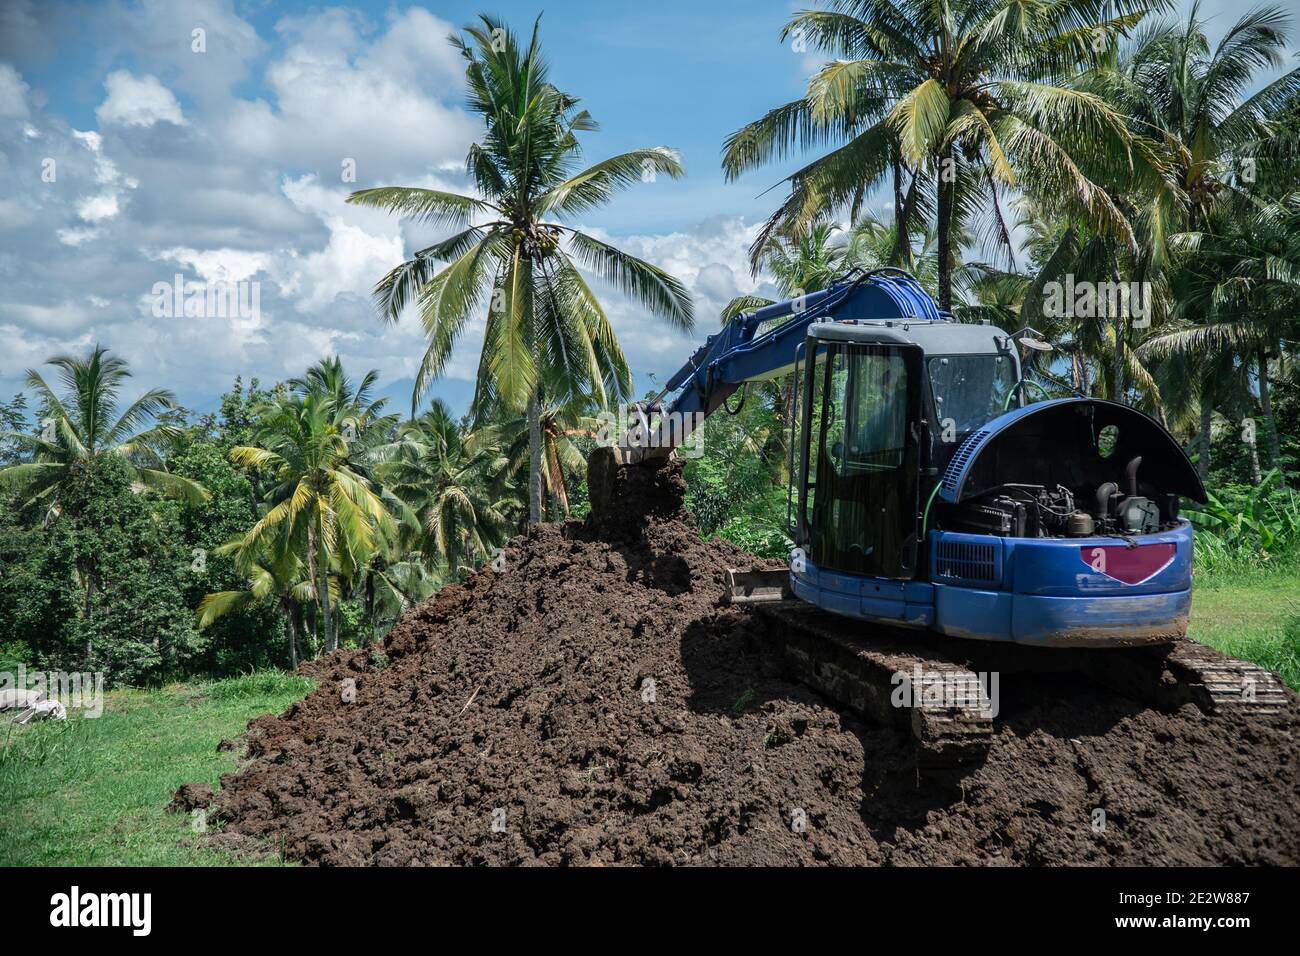 industrial bulldozer excavate ground and soil in tropical rain forest Stock Photo